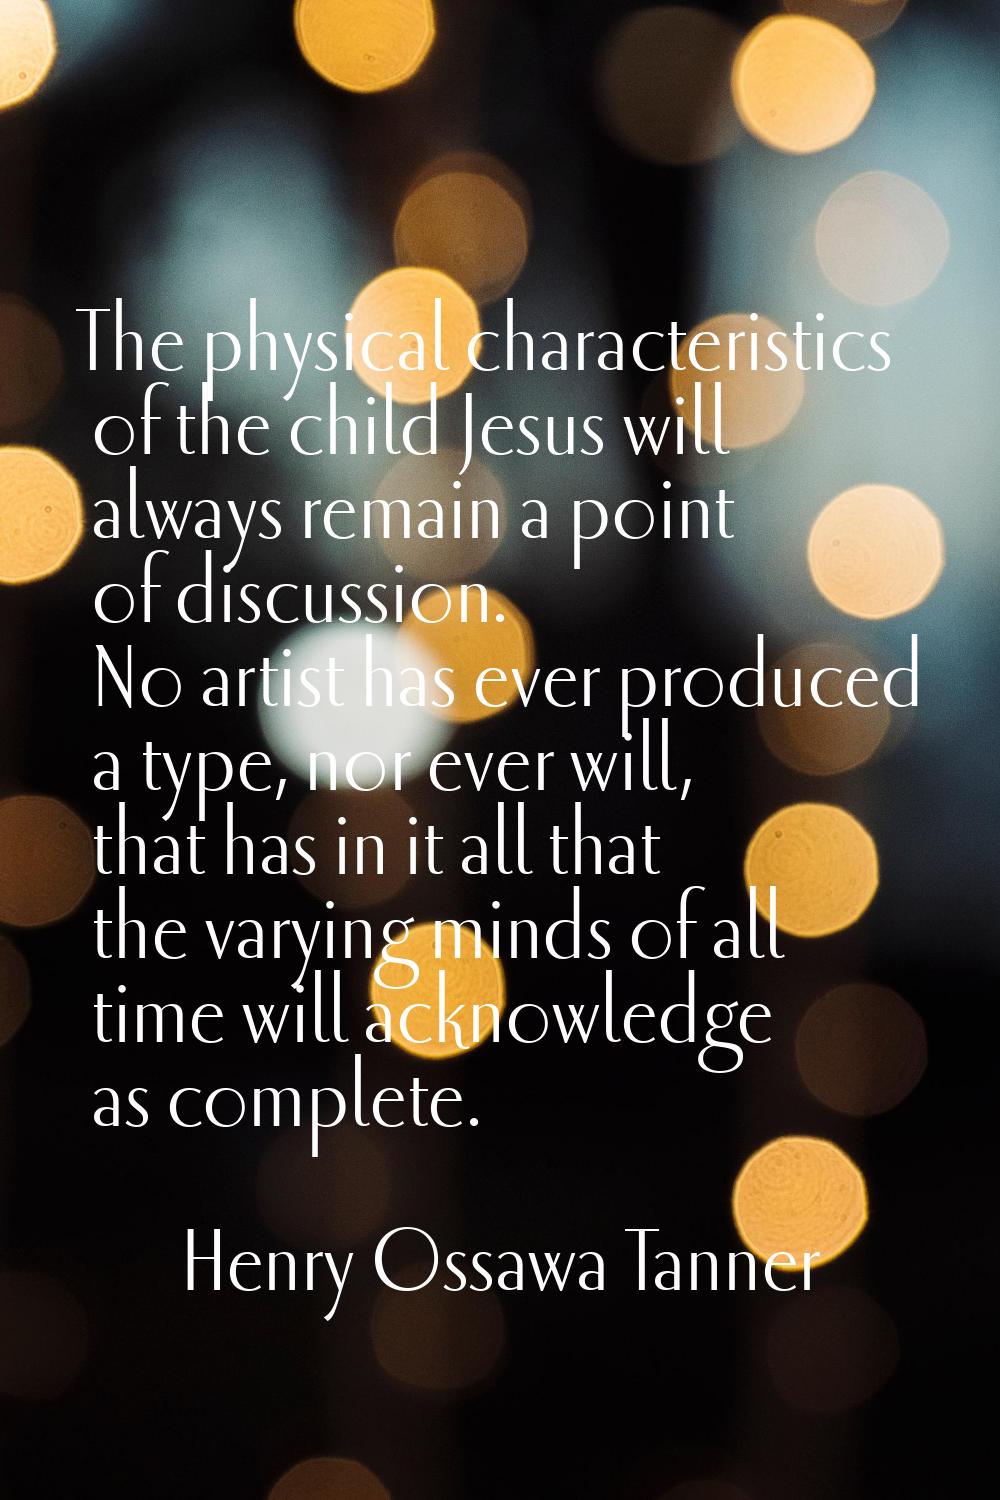 The physical characteristics of the child Jesus will always remain a point of discussion. No artist